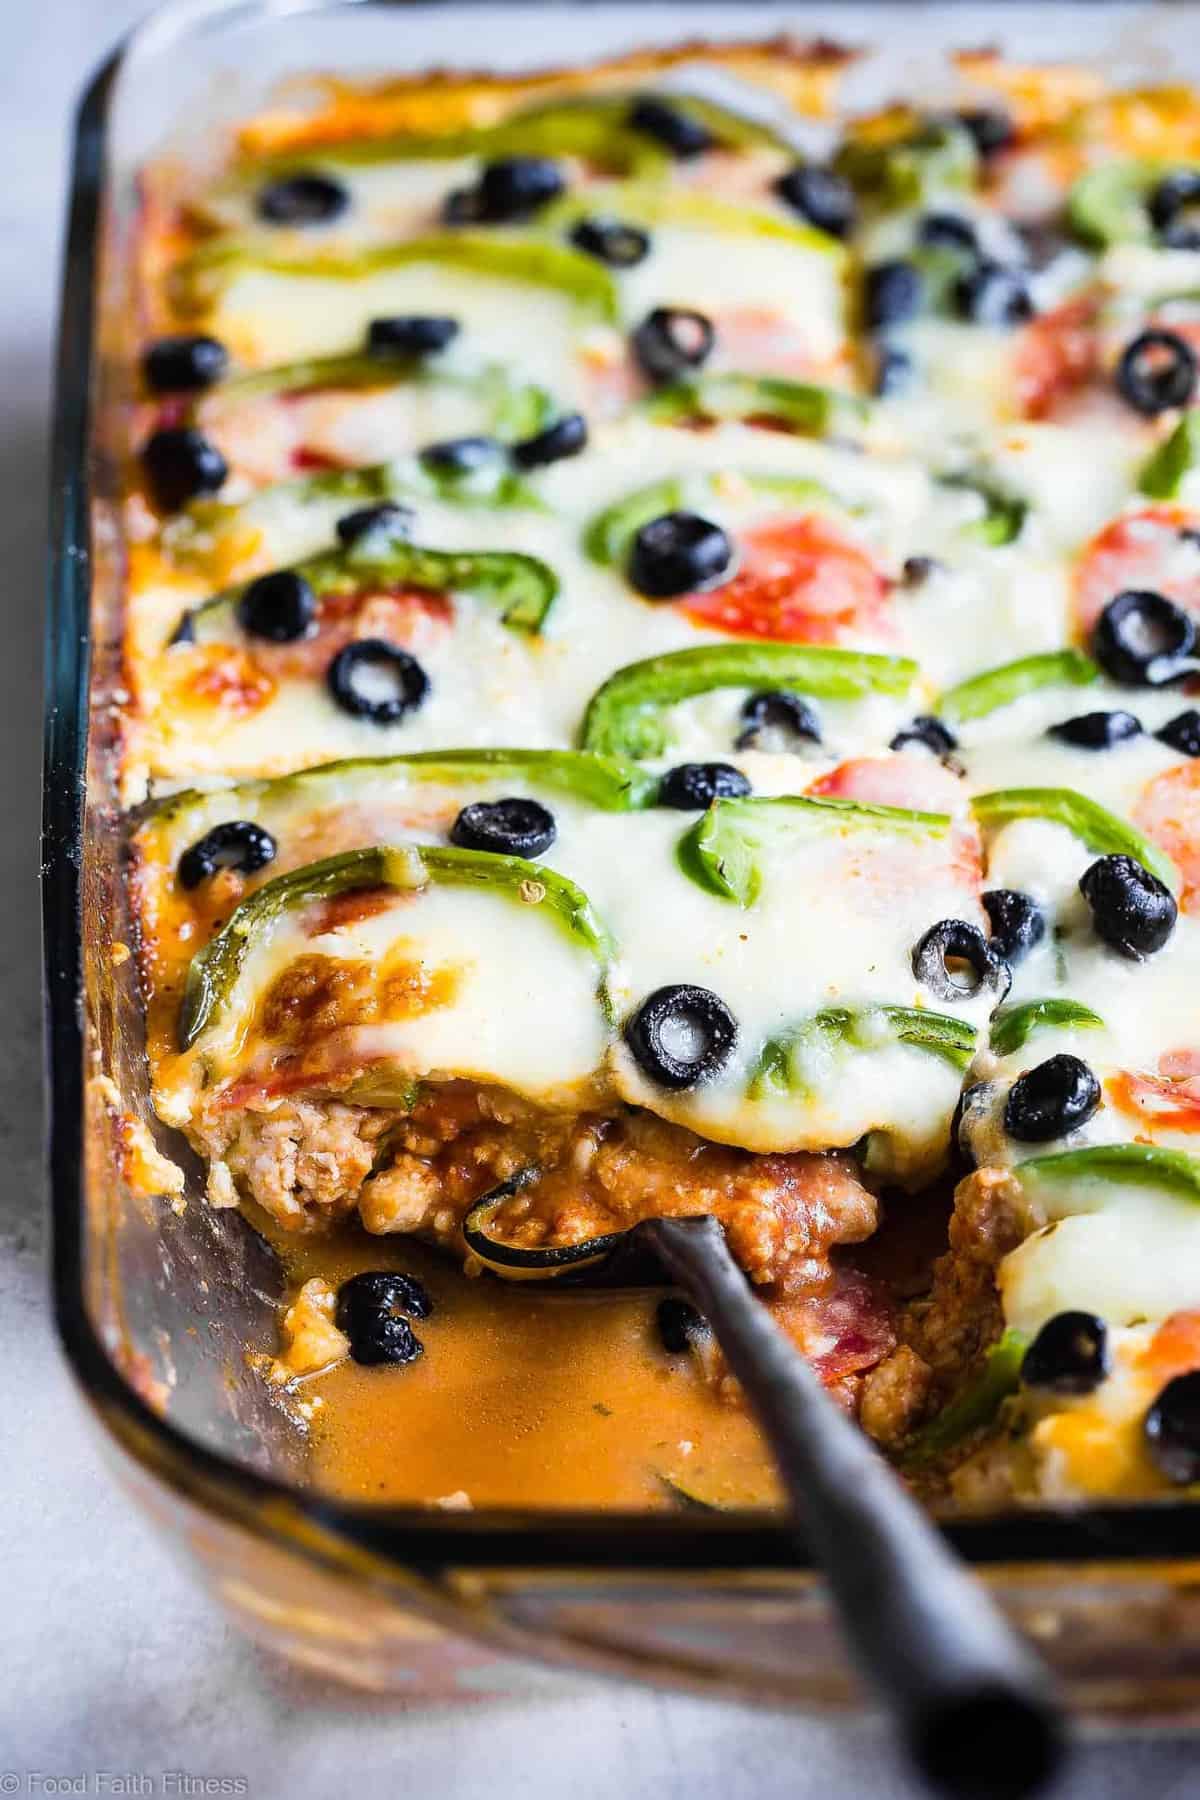 Pizza Low Carb Lasagna with Zucchini Noodles - This zucchini lasagna combines 2 classic comfort foods into one healthy and kid friendly dinner! Gluten free, under 300 calories and packed with protein too! | #Foodfaithfitness.com | #Glutenfree #Lowcarb #Healthy #KidFriendly #Lasagna